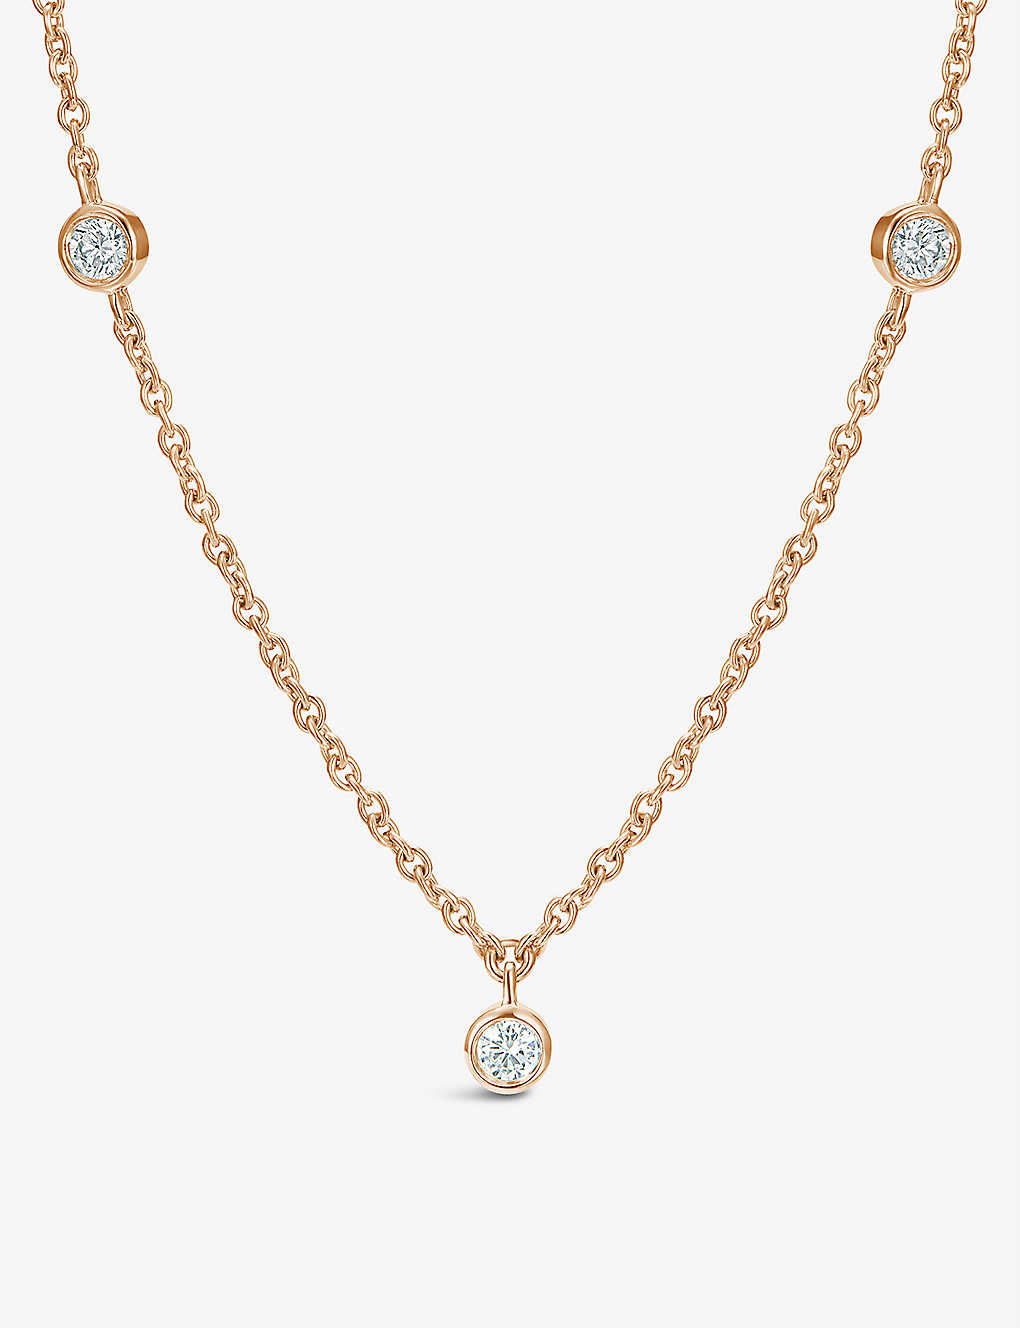 De Beers Clea 18ct Rose-gold And 0.32ct Diamond Short Chain Necklace In 18k Rose Gold